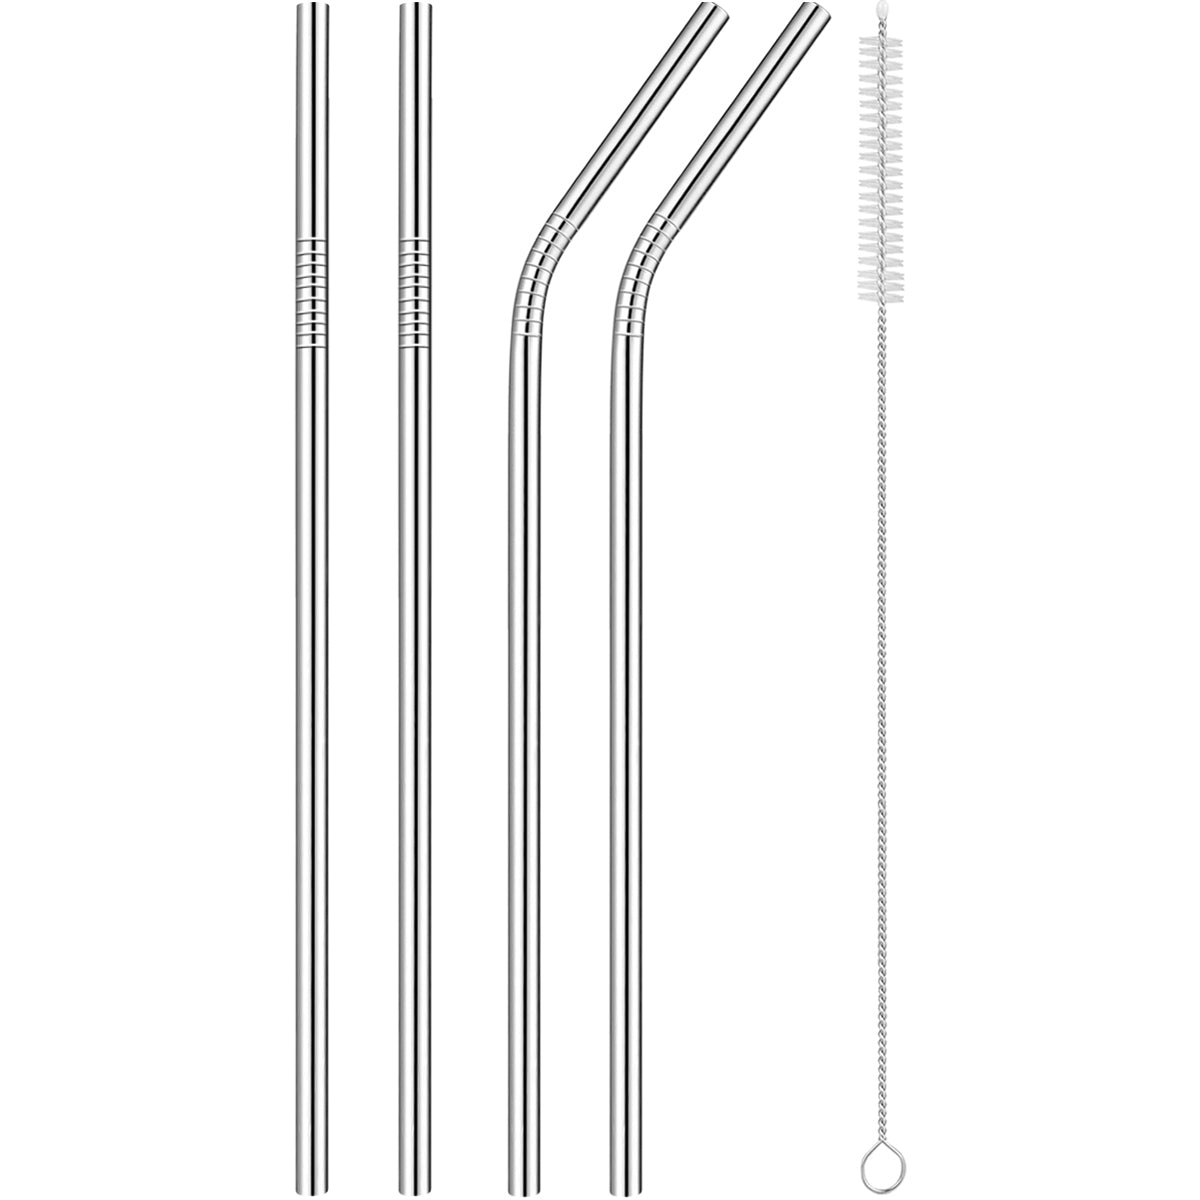 Forza Sports Reusable Stainless Steel Straws 4-Pack with Cleaning Brush Forza Sports